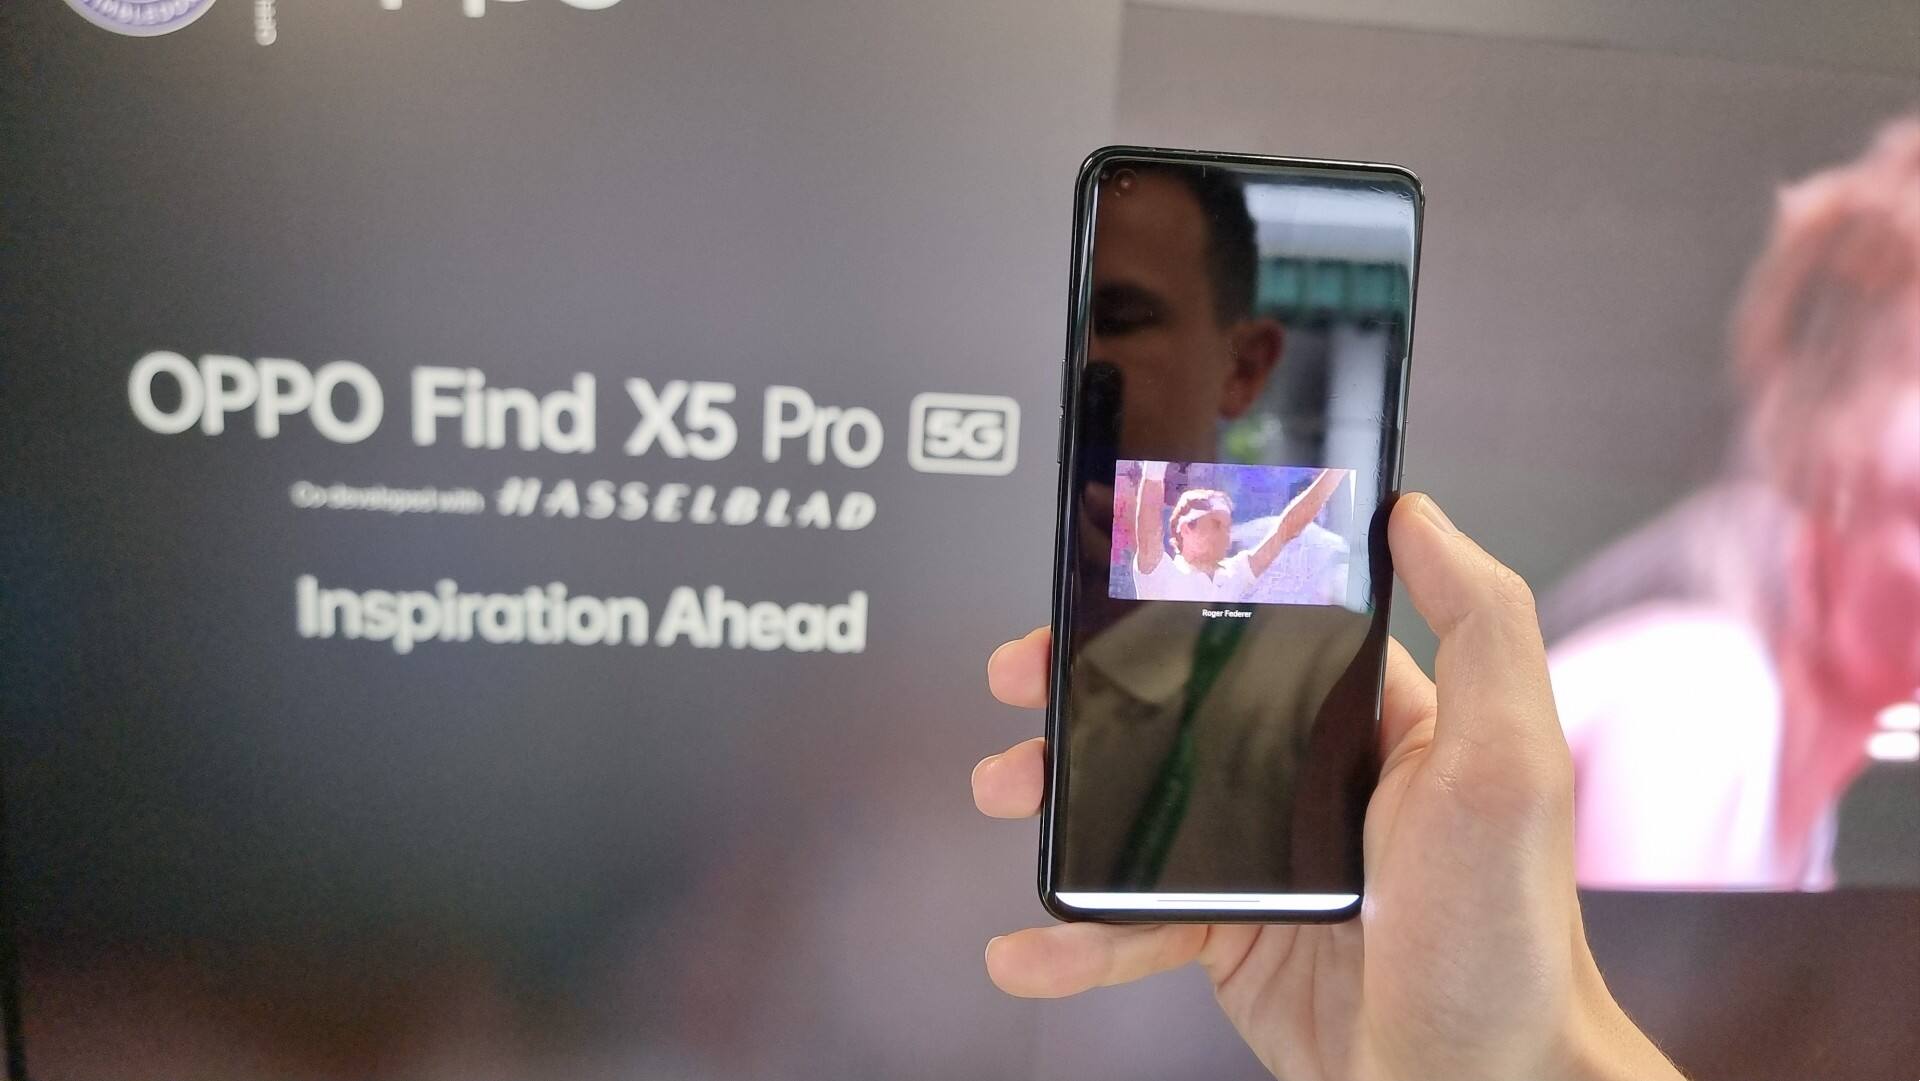 CybeReal 2.0 con Oppo Find X5 PRO